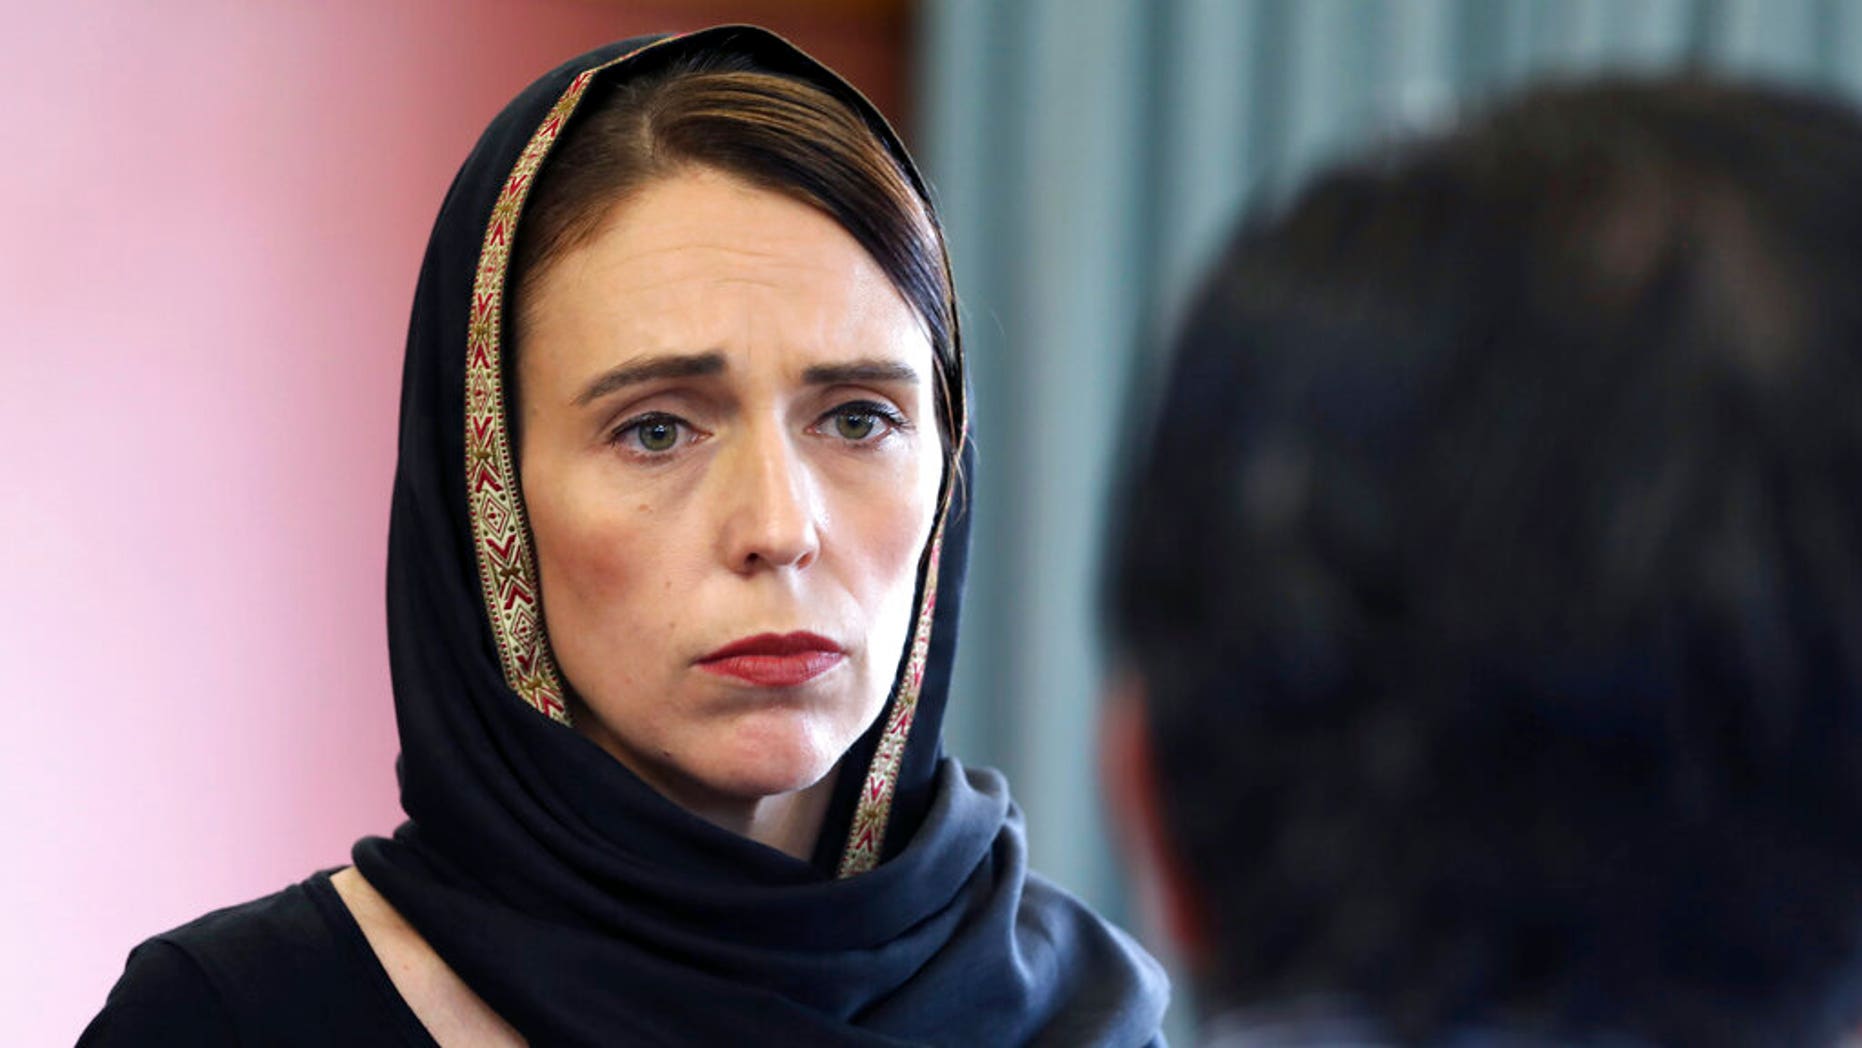 New Zealand Prime Minister Vows Never To Mention Mosque Gunmans Name Fox News